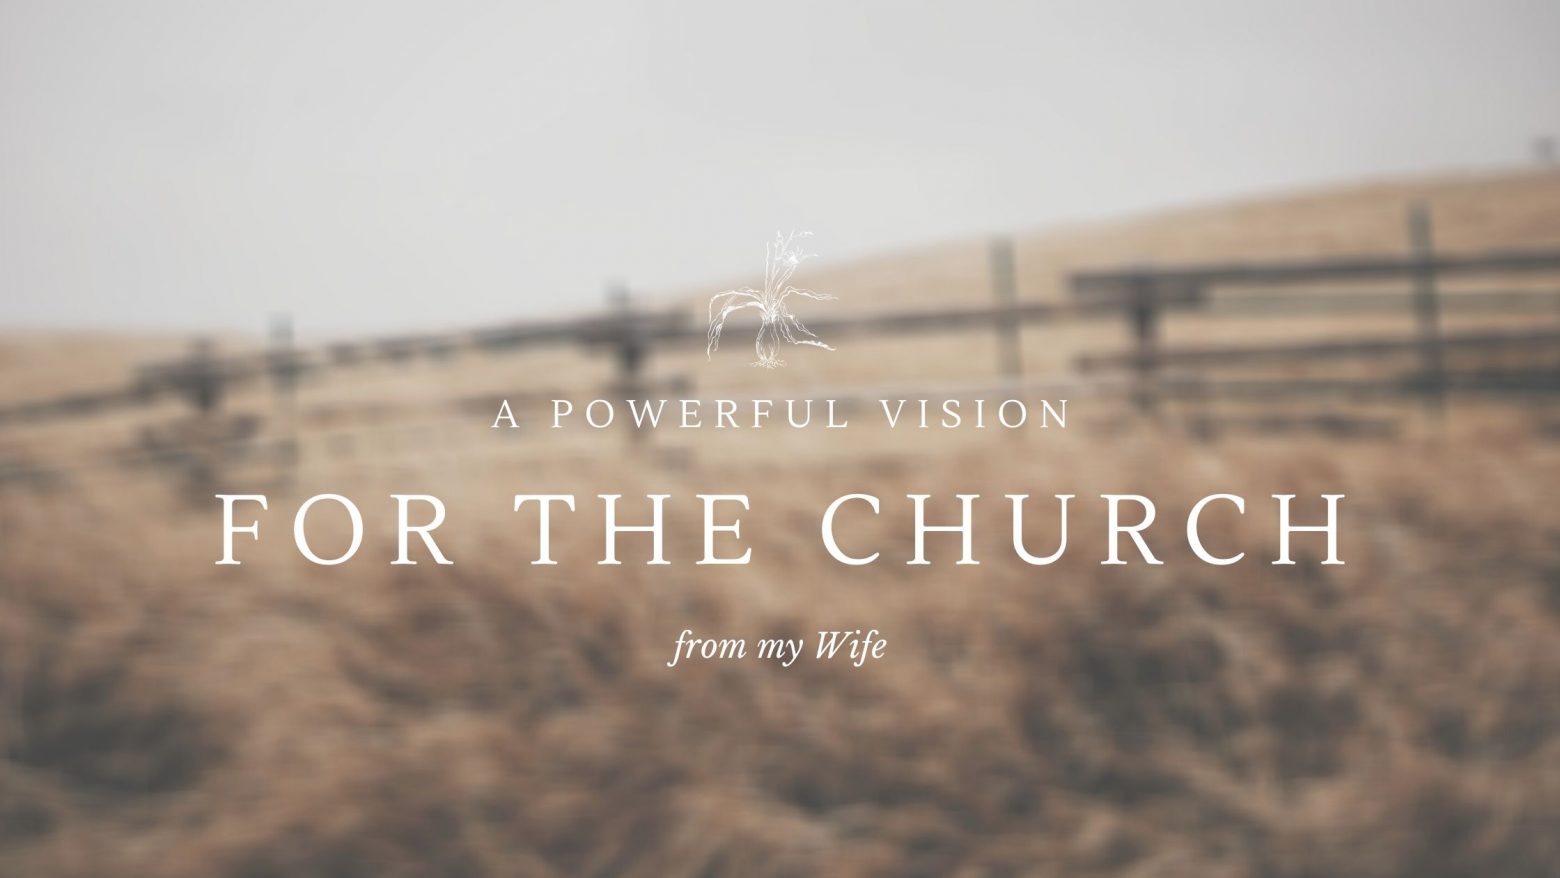 Powerful vision for the church